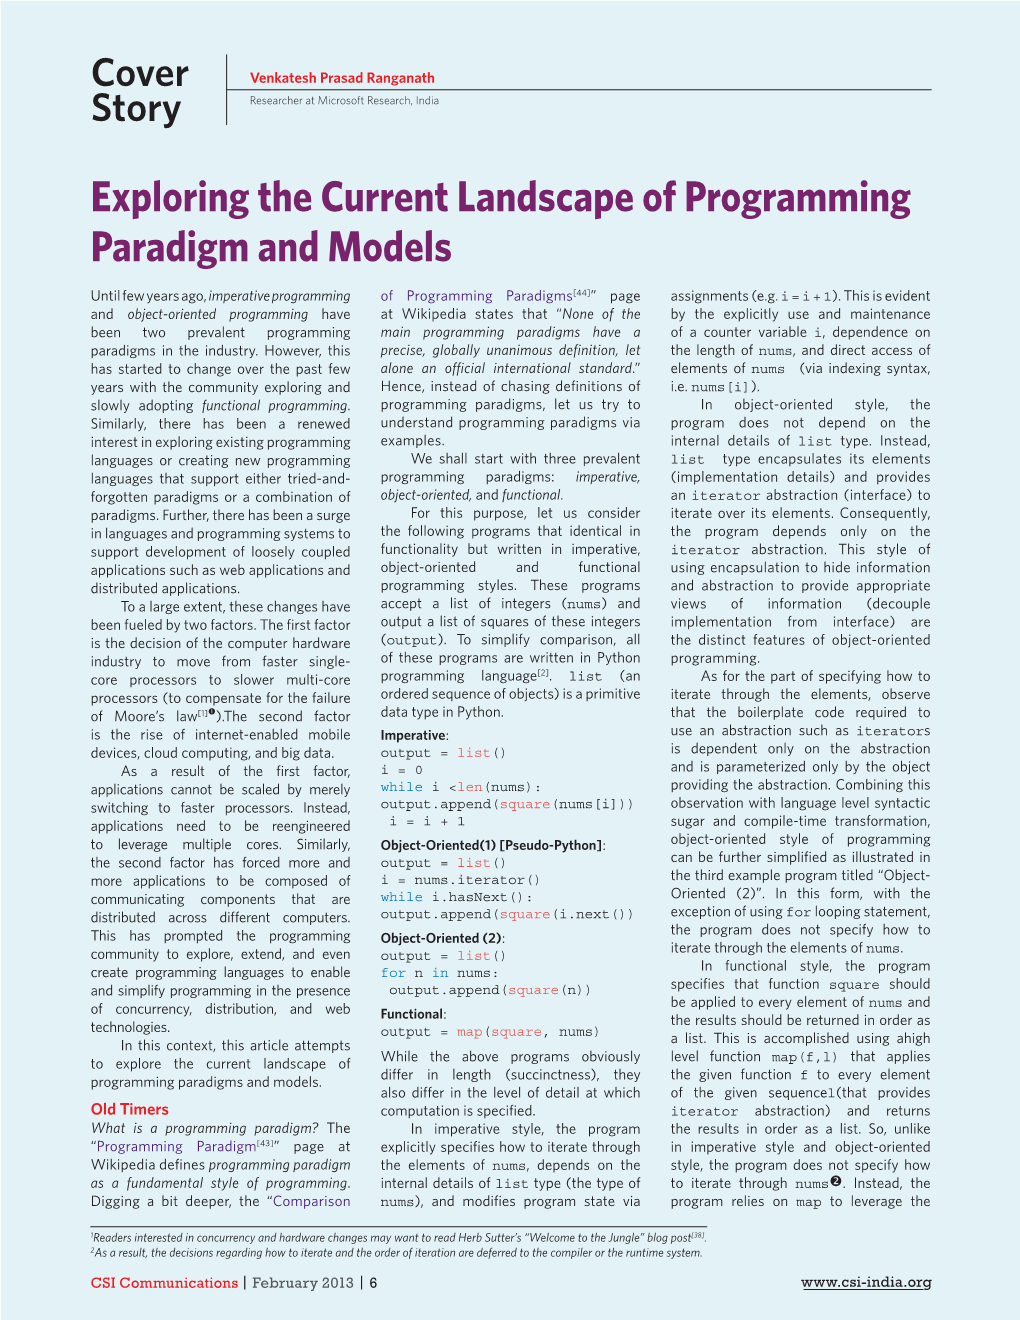 Exploring the Current Landscape of Programming Paradigm and Models